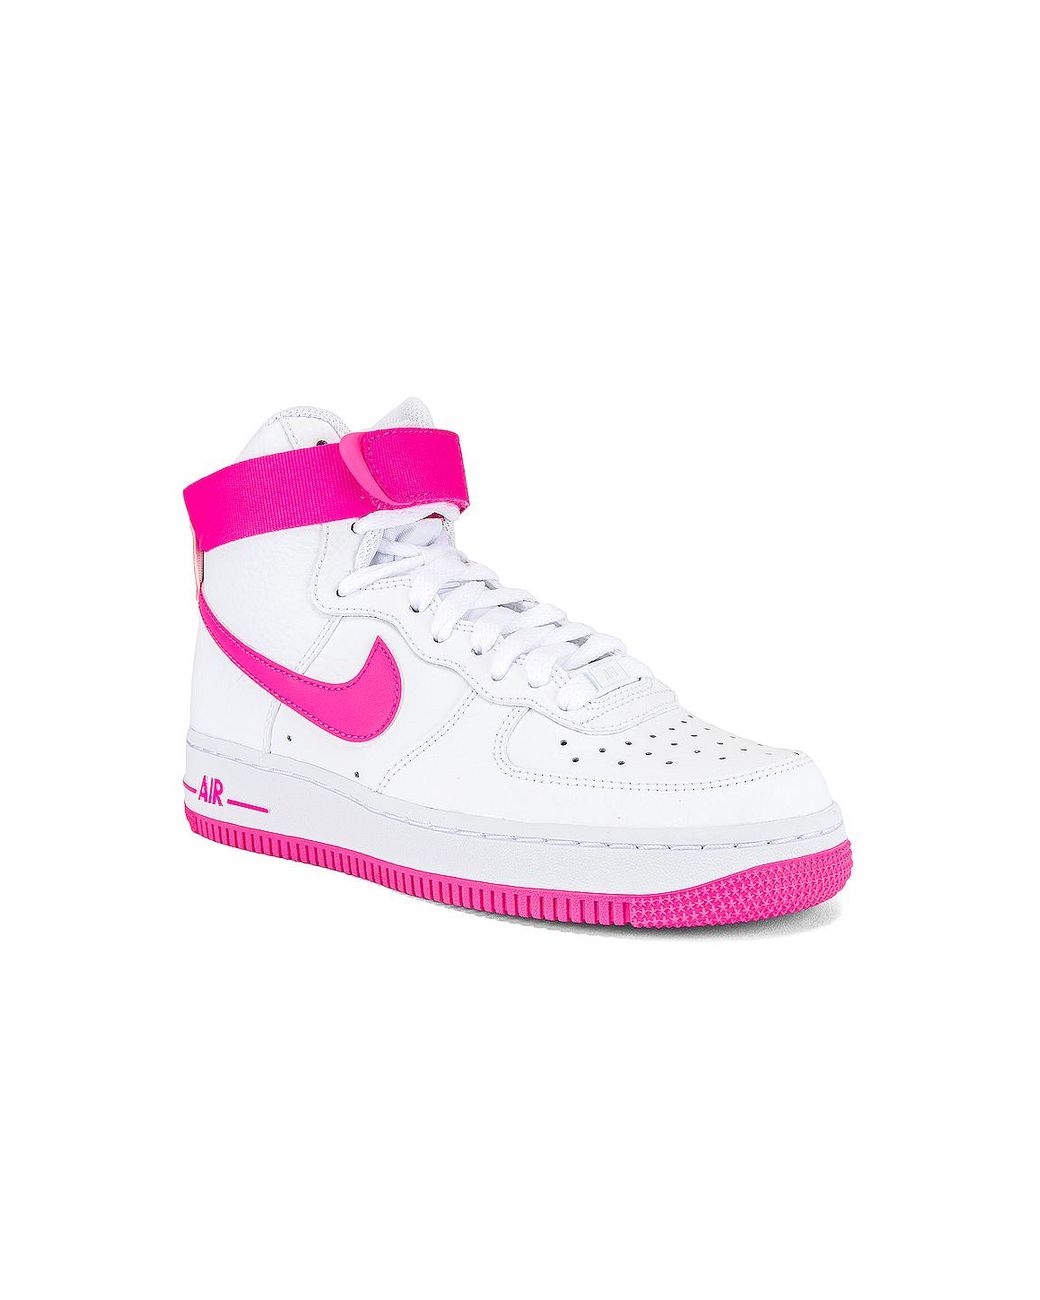 Nike Leather Women's Air Force 1 Hi Sneaker in White & Hot Pink (Pink) |  Lyst